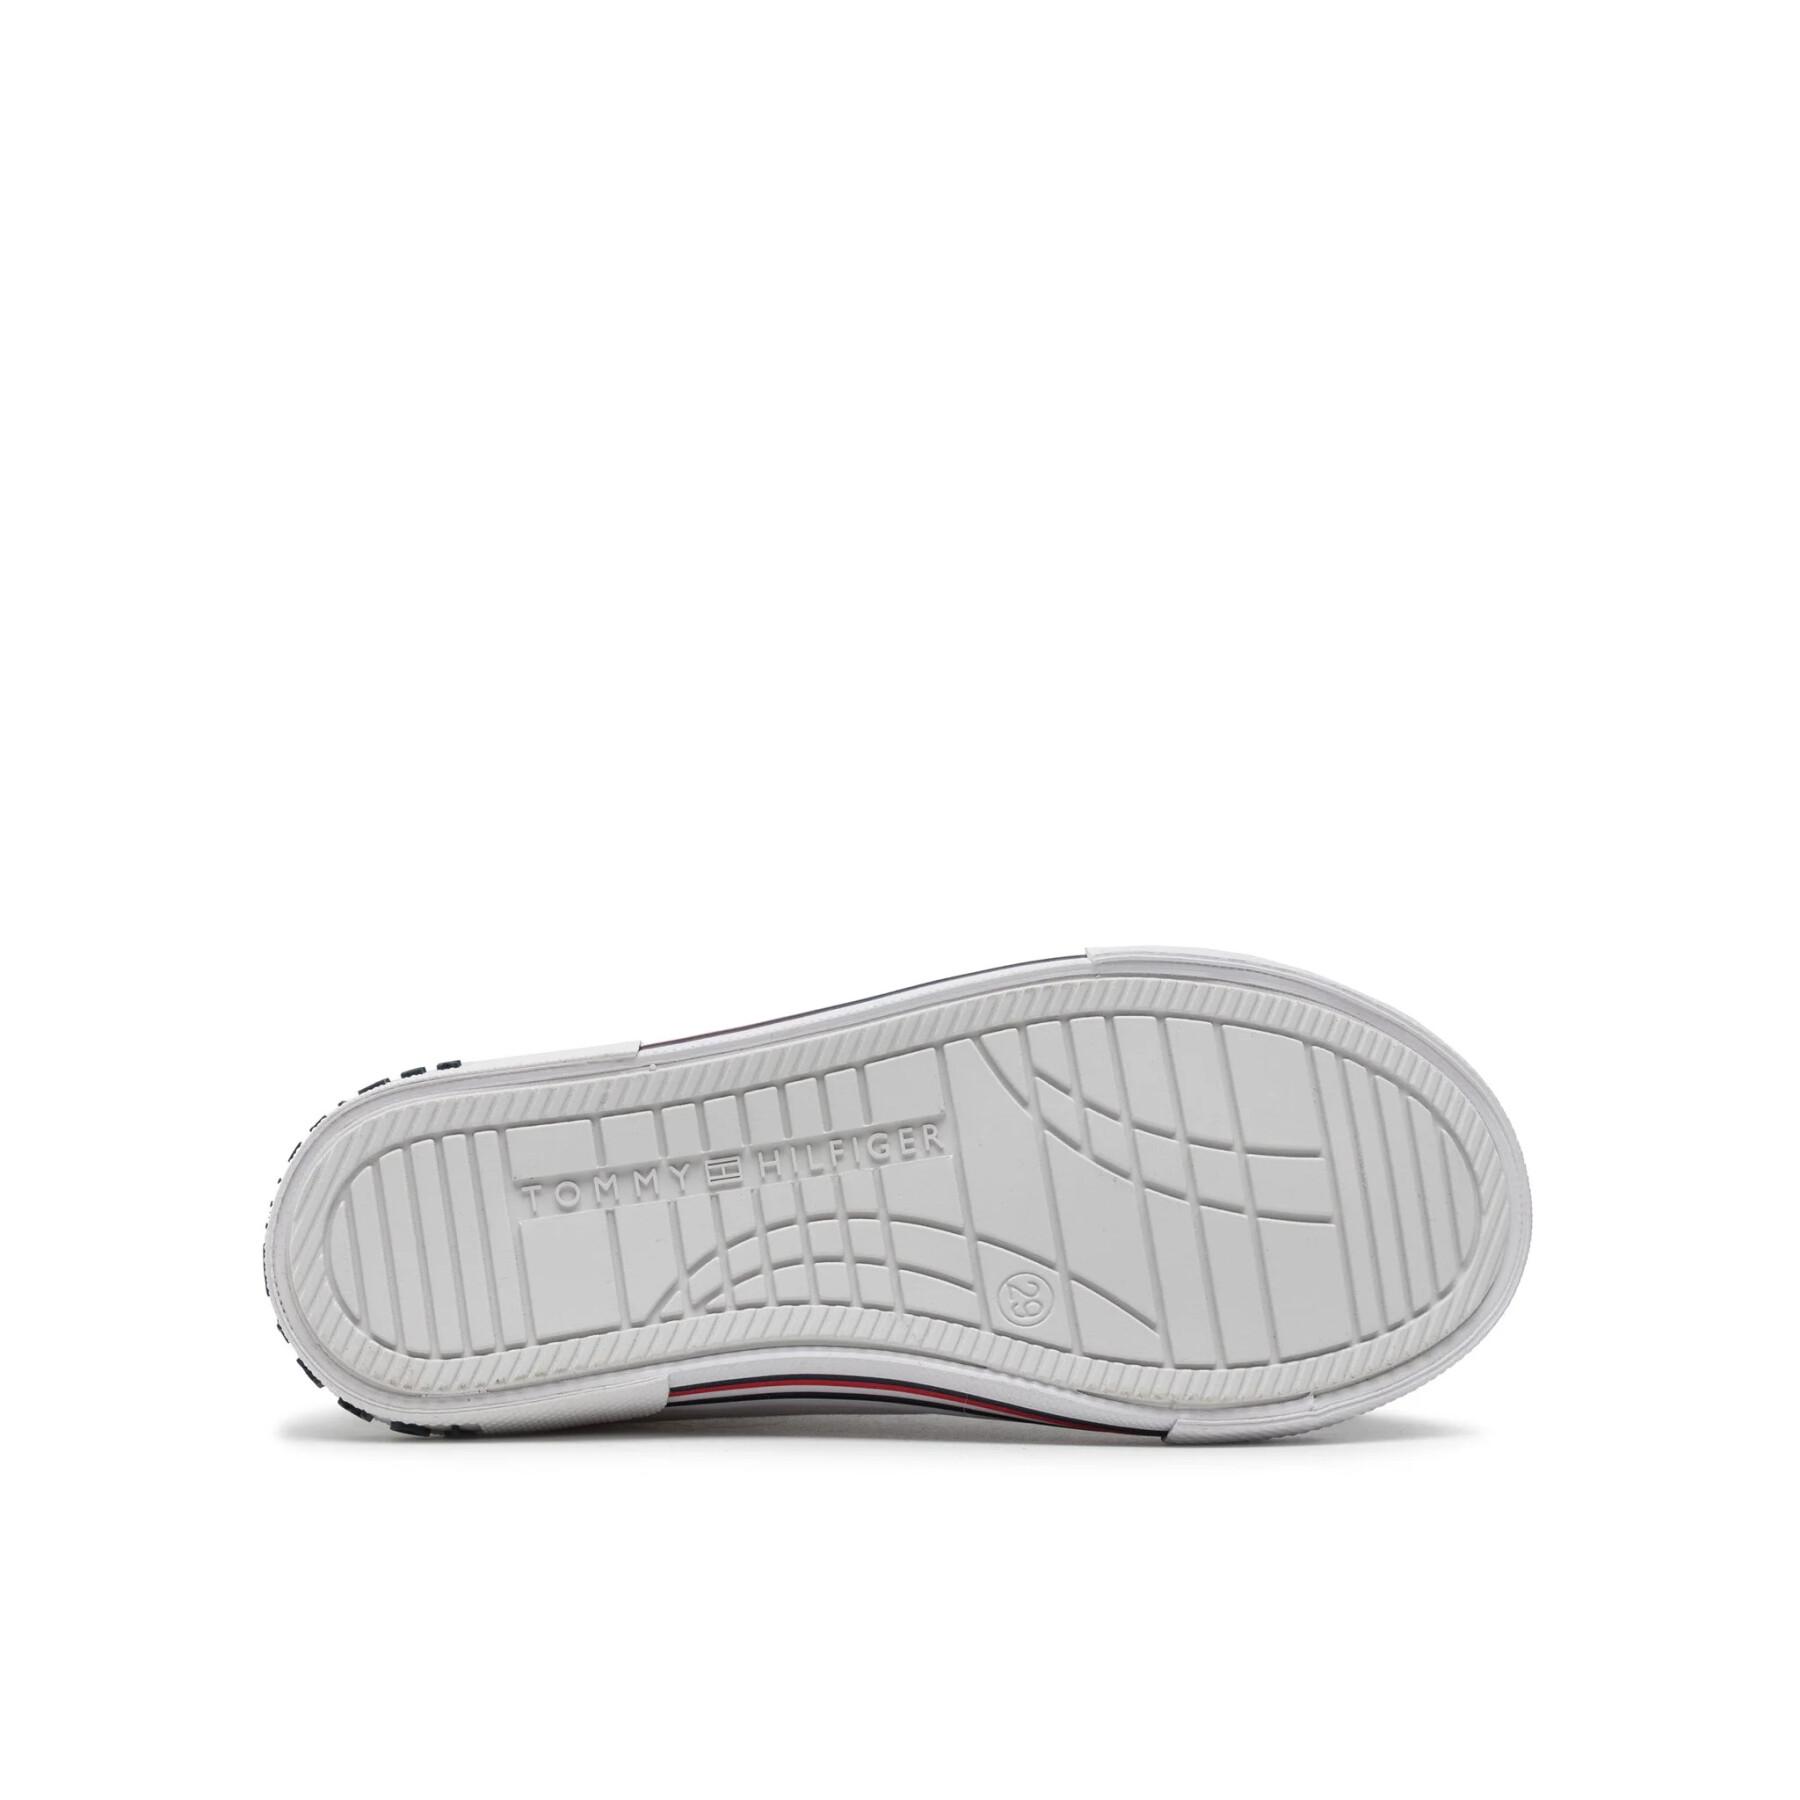 Girl sneakers Tommy Hilfiger White